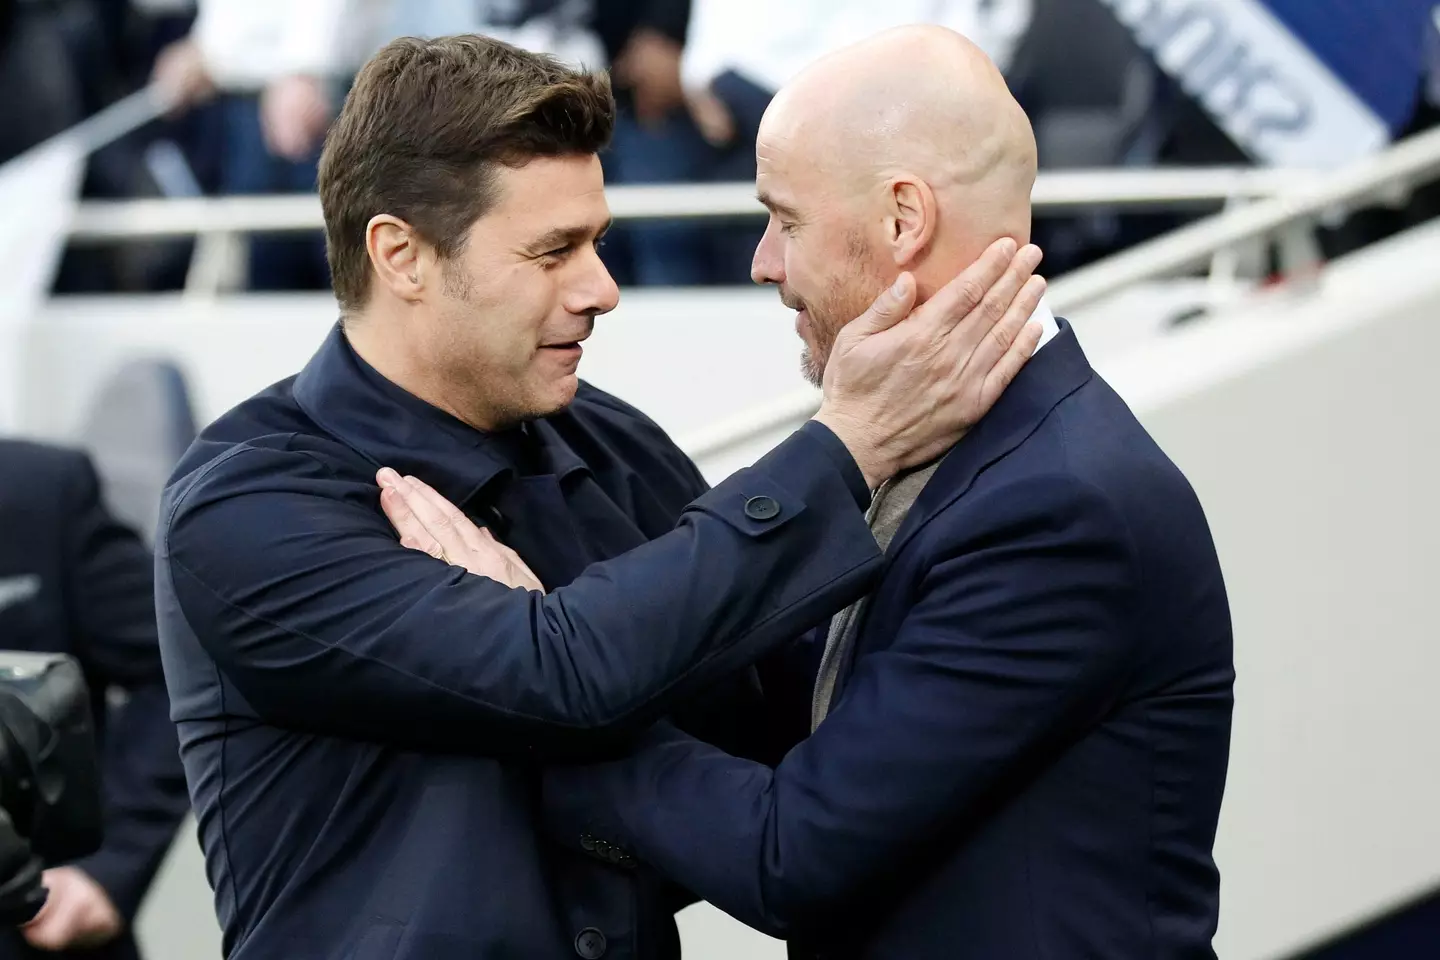 Pochettino and Ten Hag met in the Champions League in 2019. Image: PA Images